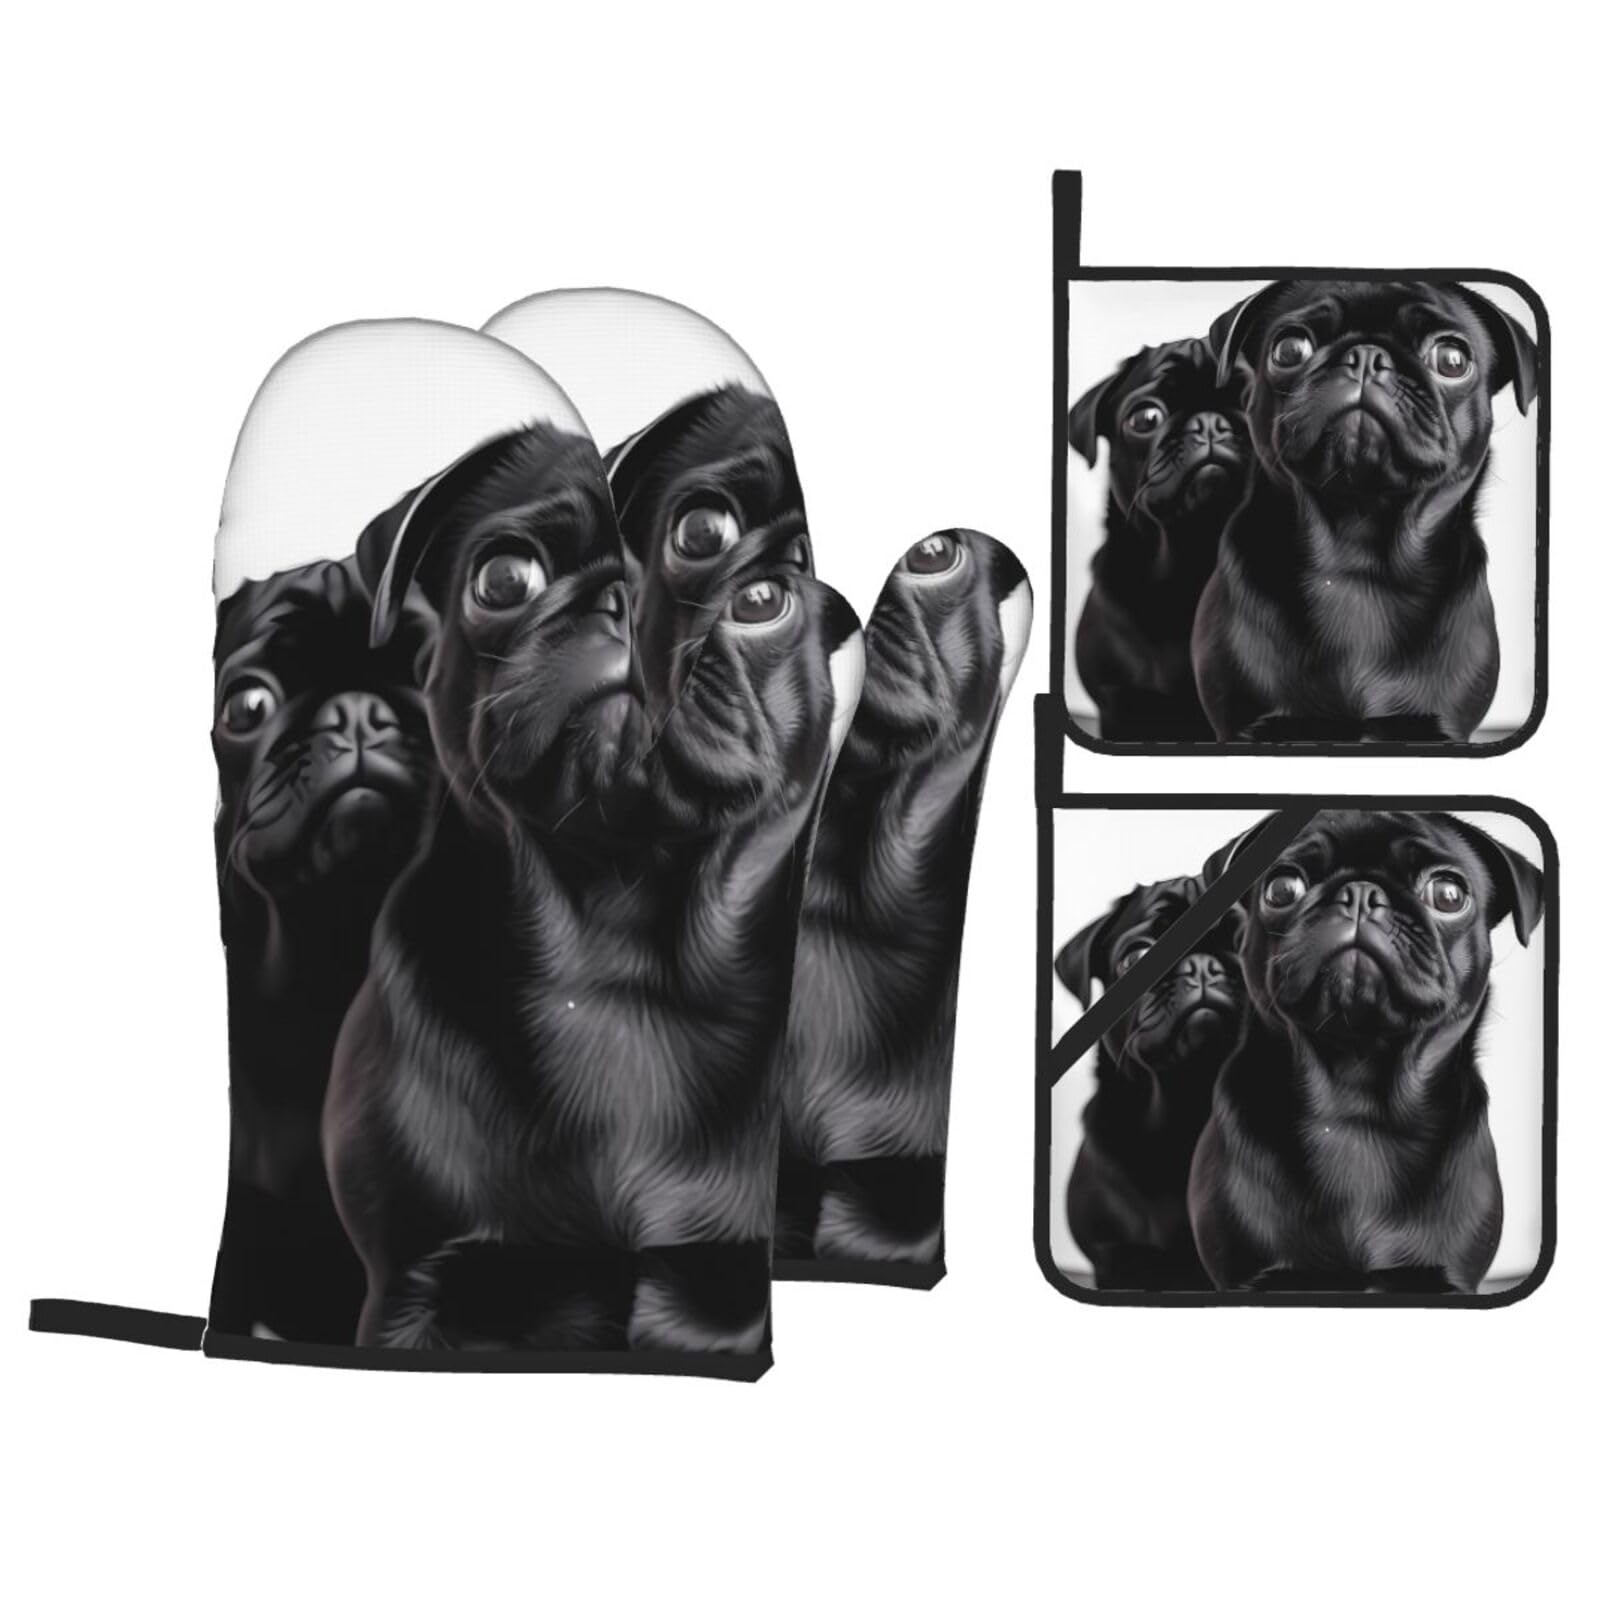 Oven Mitts and Pot Holders Set of 4 Cute Black Pug Dog Print Kitchen Oven Glove Fashion Heat Resistant Oven Gloves Set for BBQ Grill Baking Cooking Oven Microwave